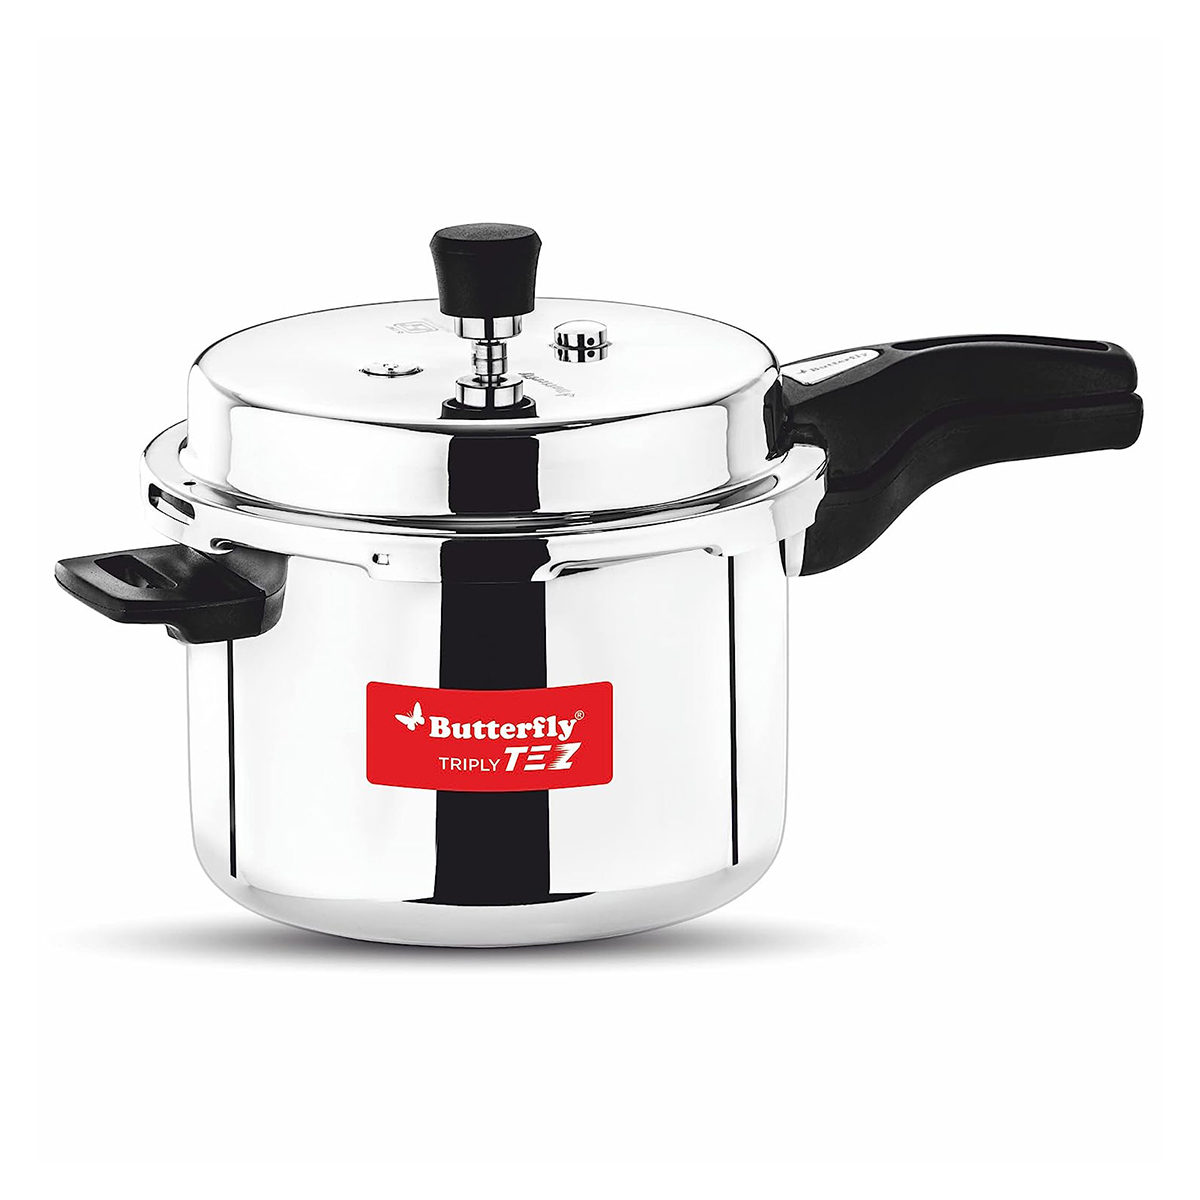 Butterfly Tez Olc Triply Pressure Cooker 3L